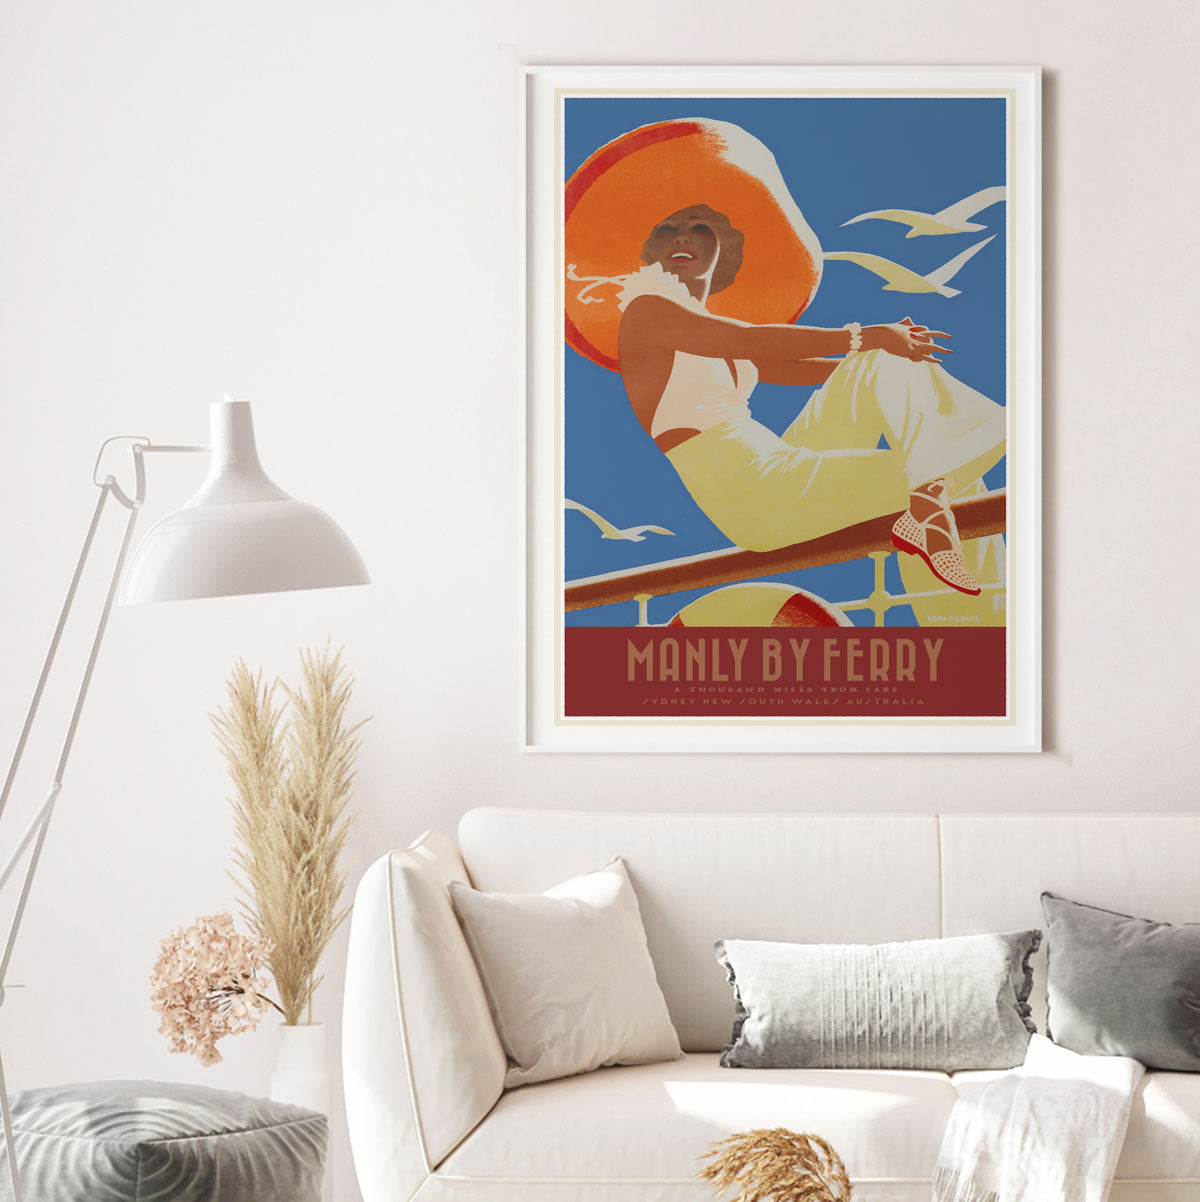 Manly vintage retro travel poster print from Places We Luv